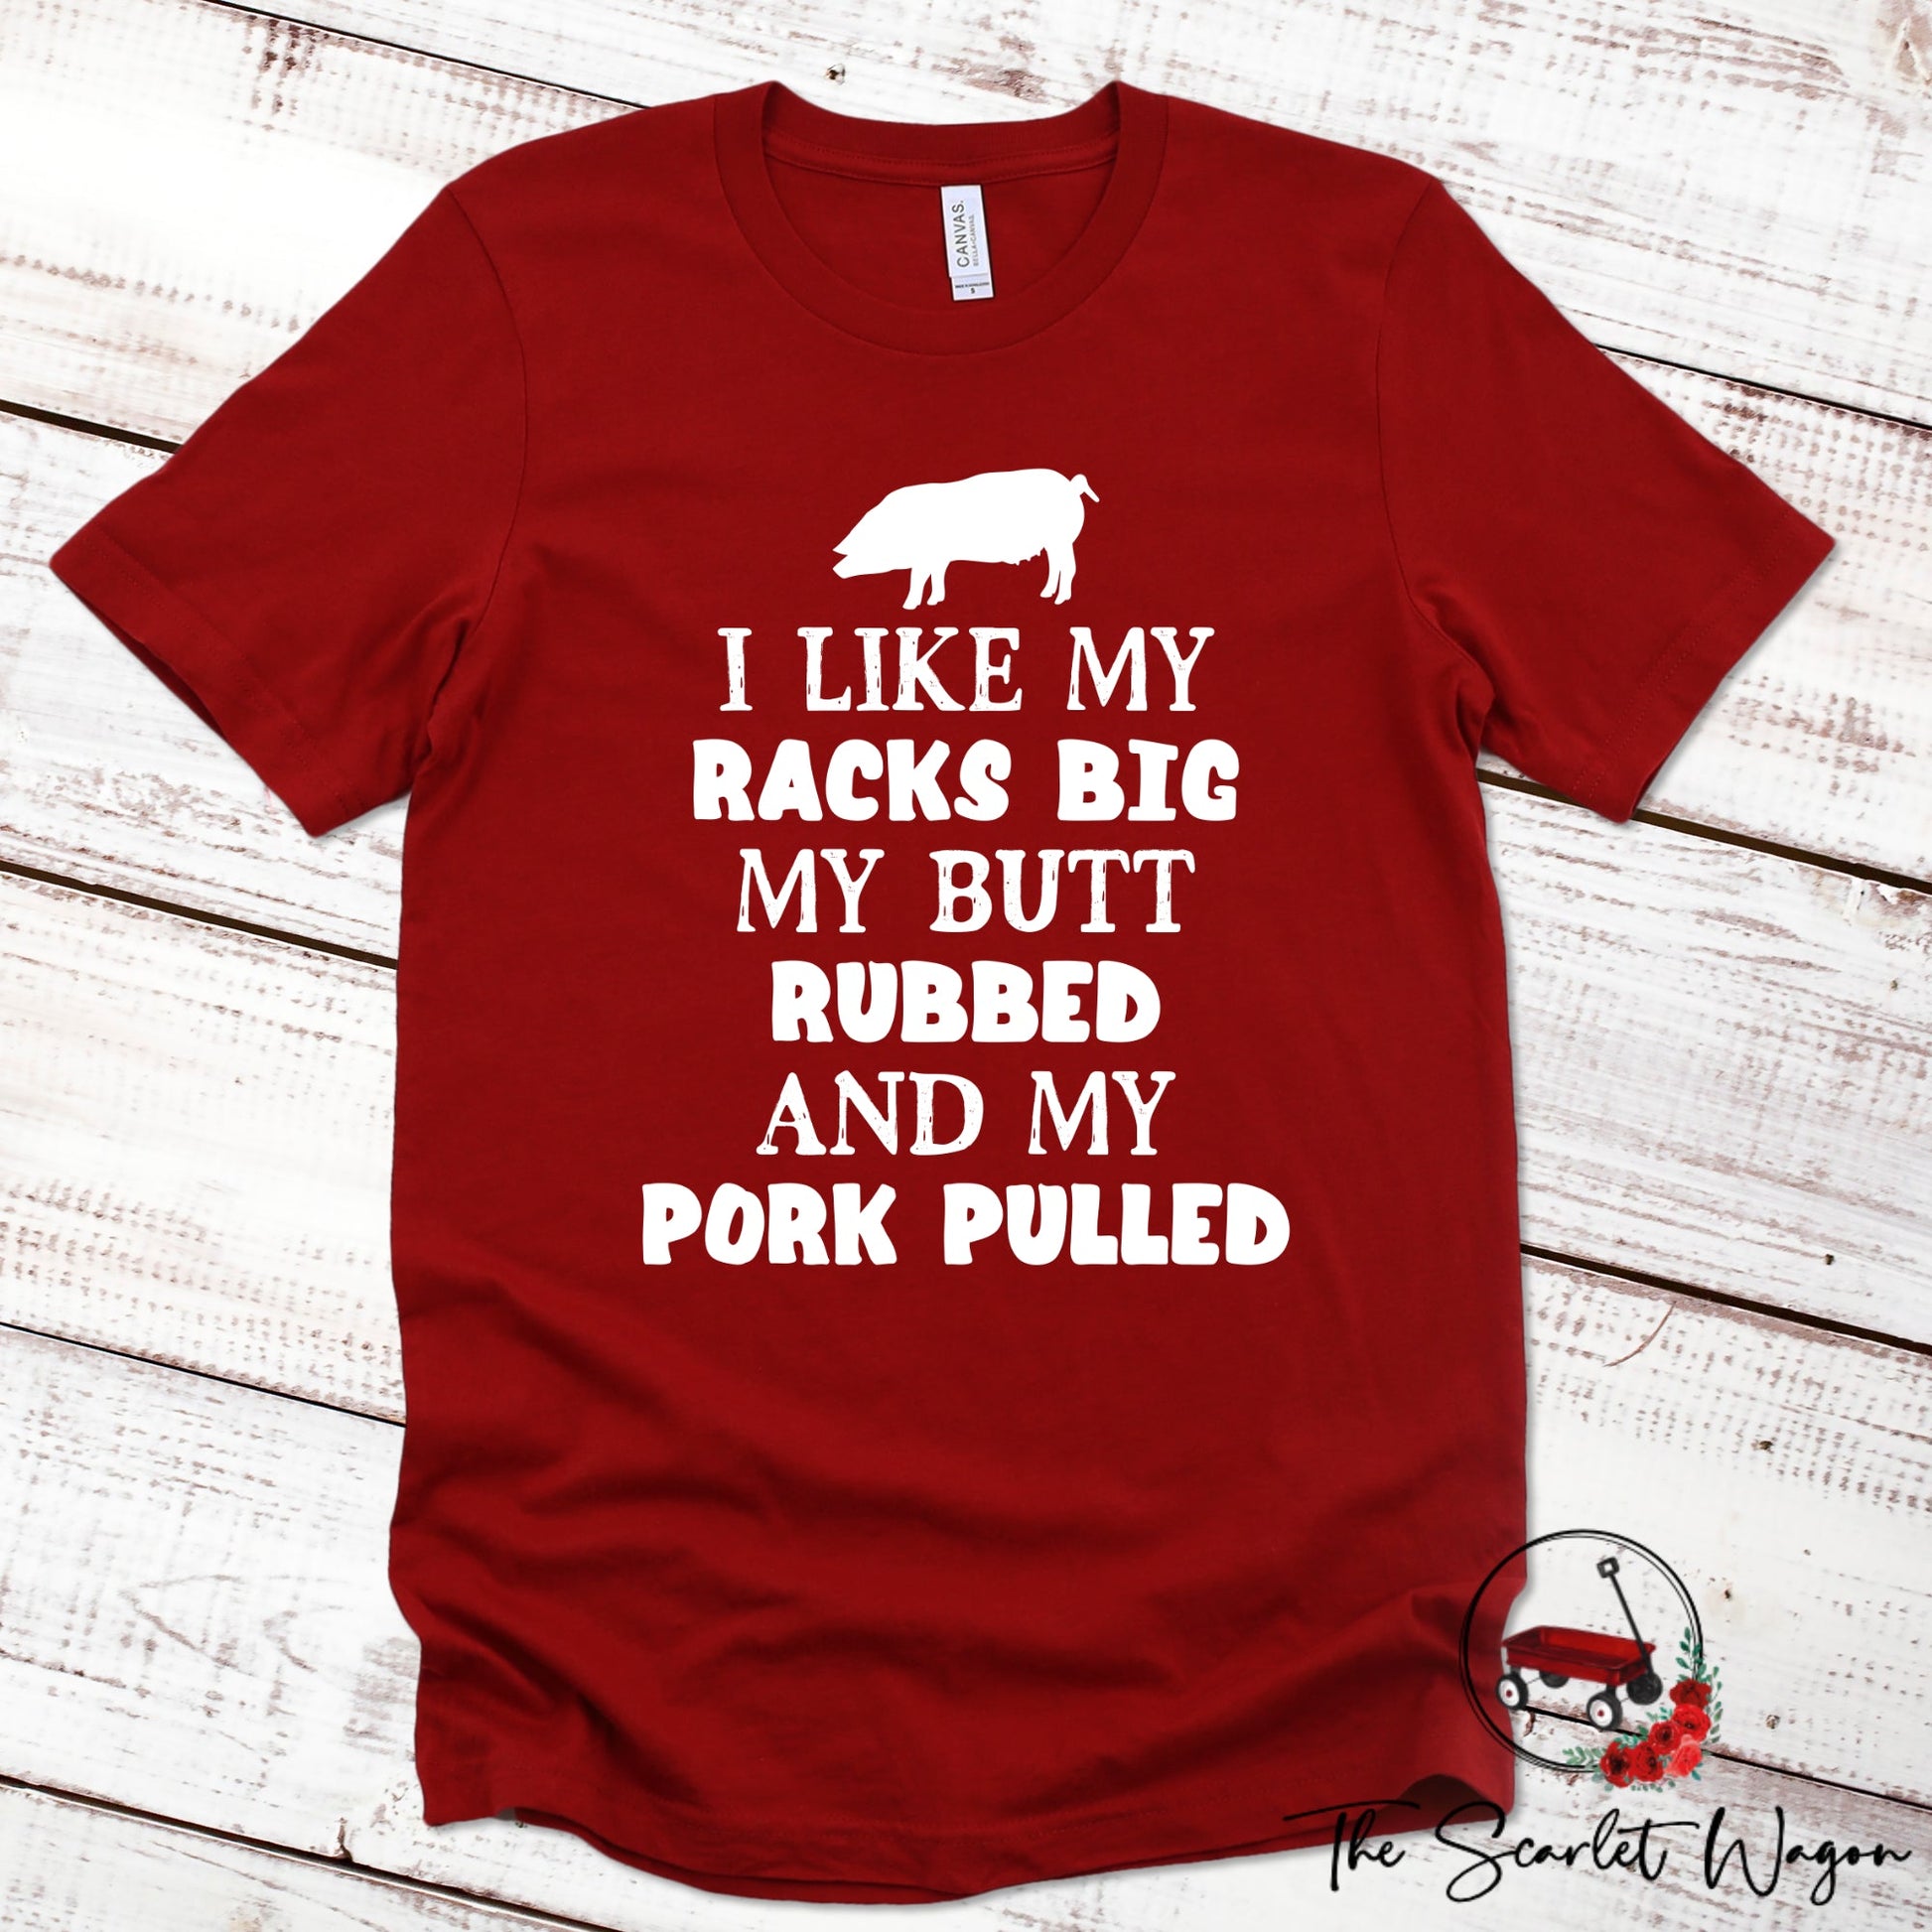 I Like My Racks Big, My Butt Rubbed and My Pork Pulled Premium Tee Scarlet Wagon Red XS 